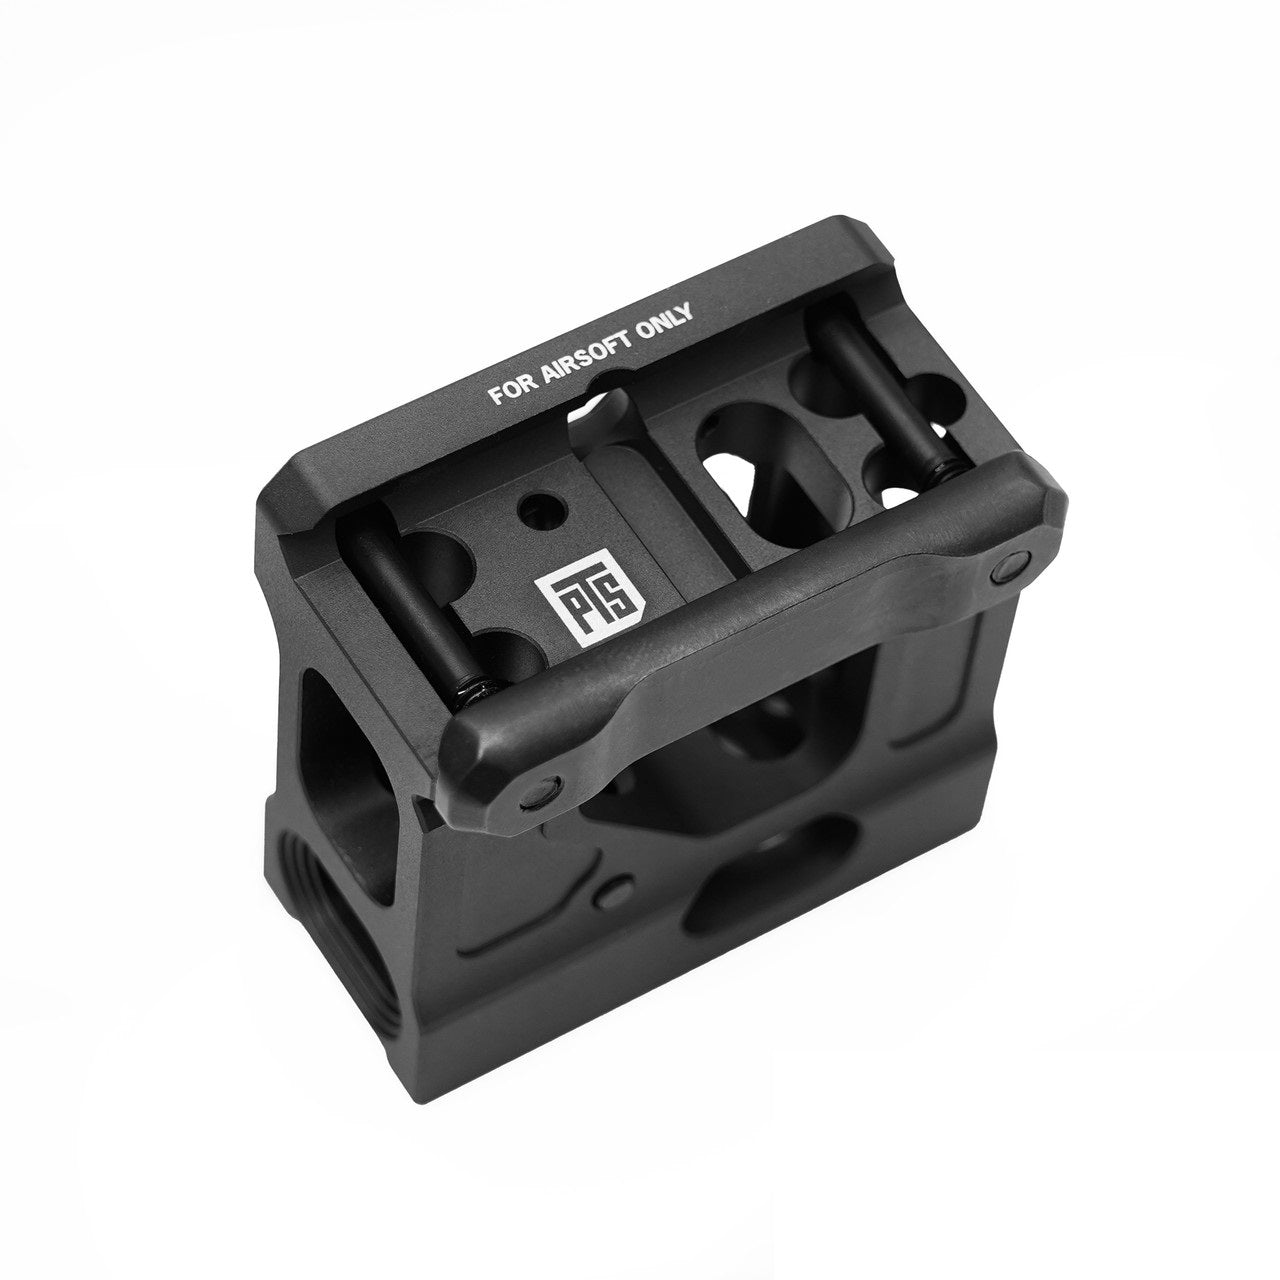 PTS UNITY TACTICAL FAS MICRO RISER MOUNT - ssairsoft.com